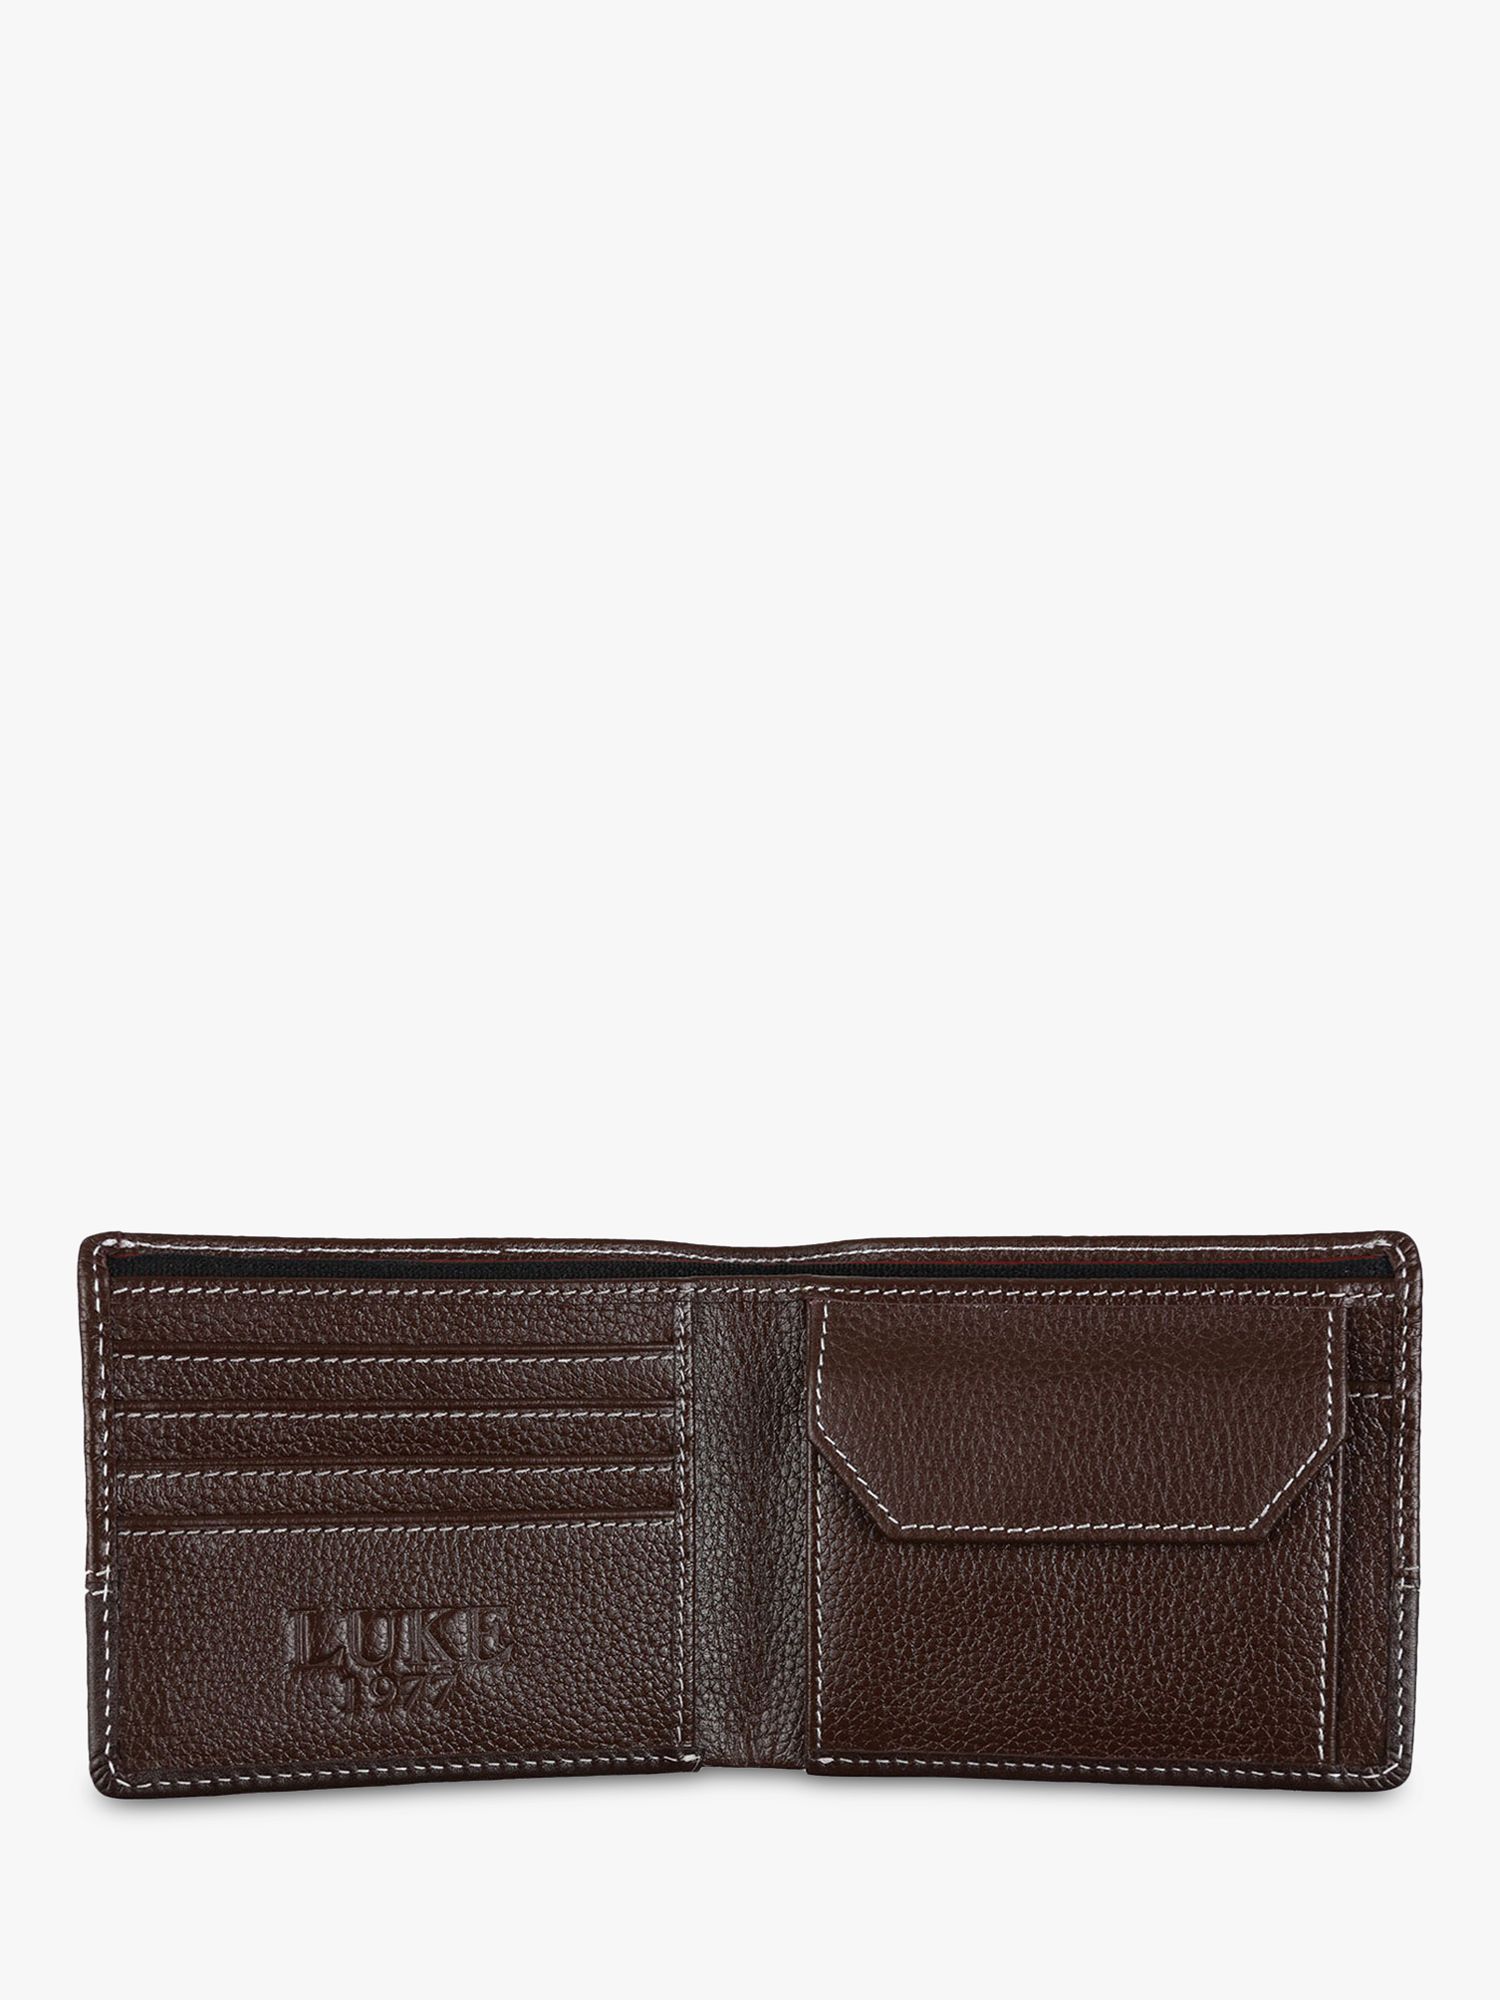 LUKE 1977 Volcombe Leather Wallet, Brown, One Size